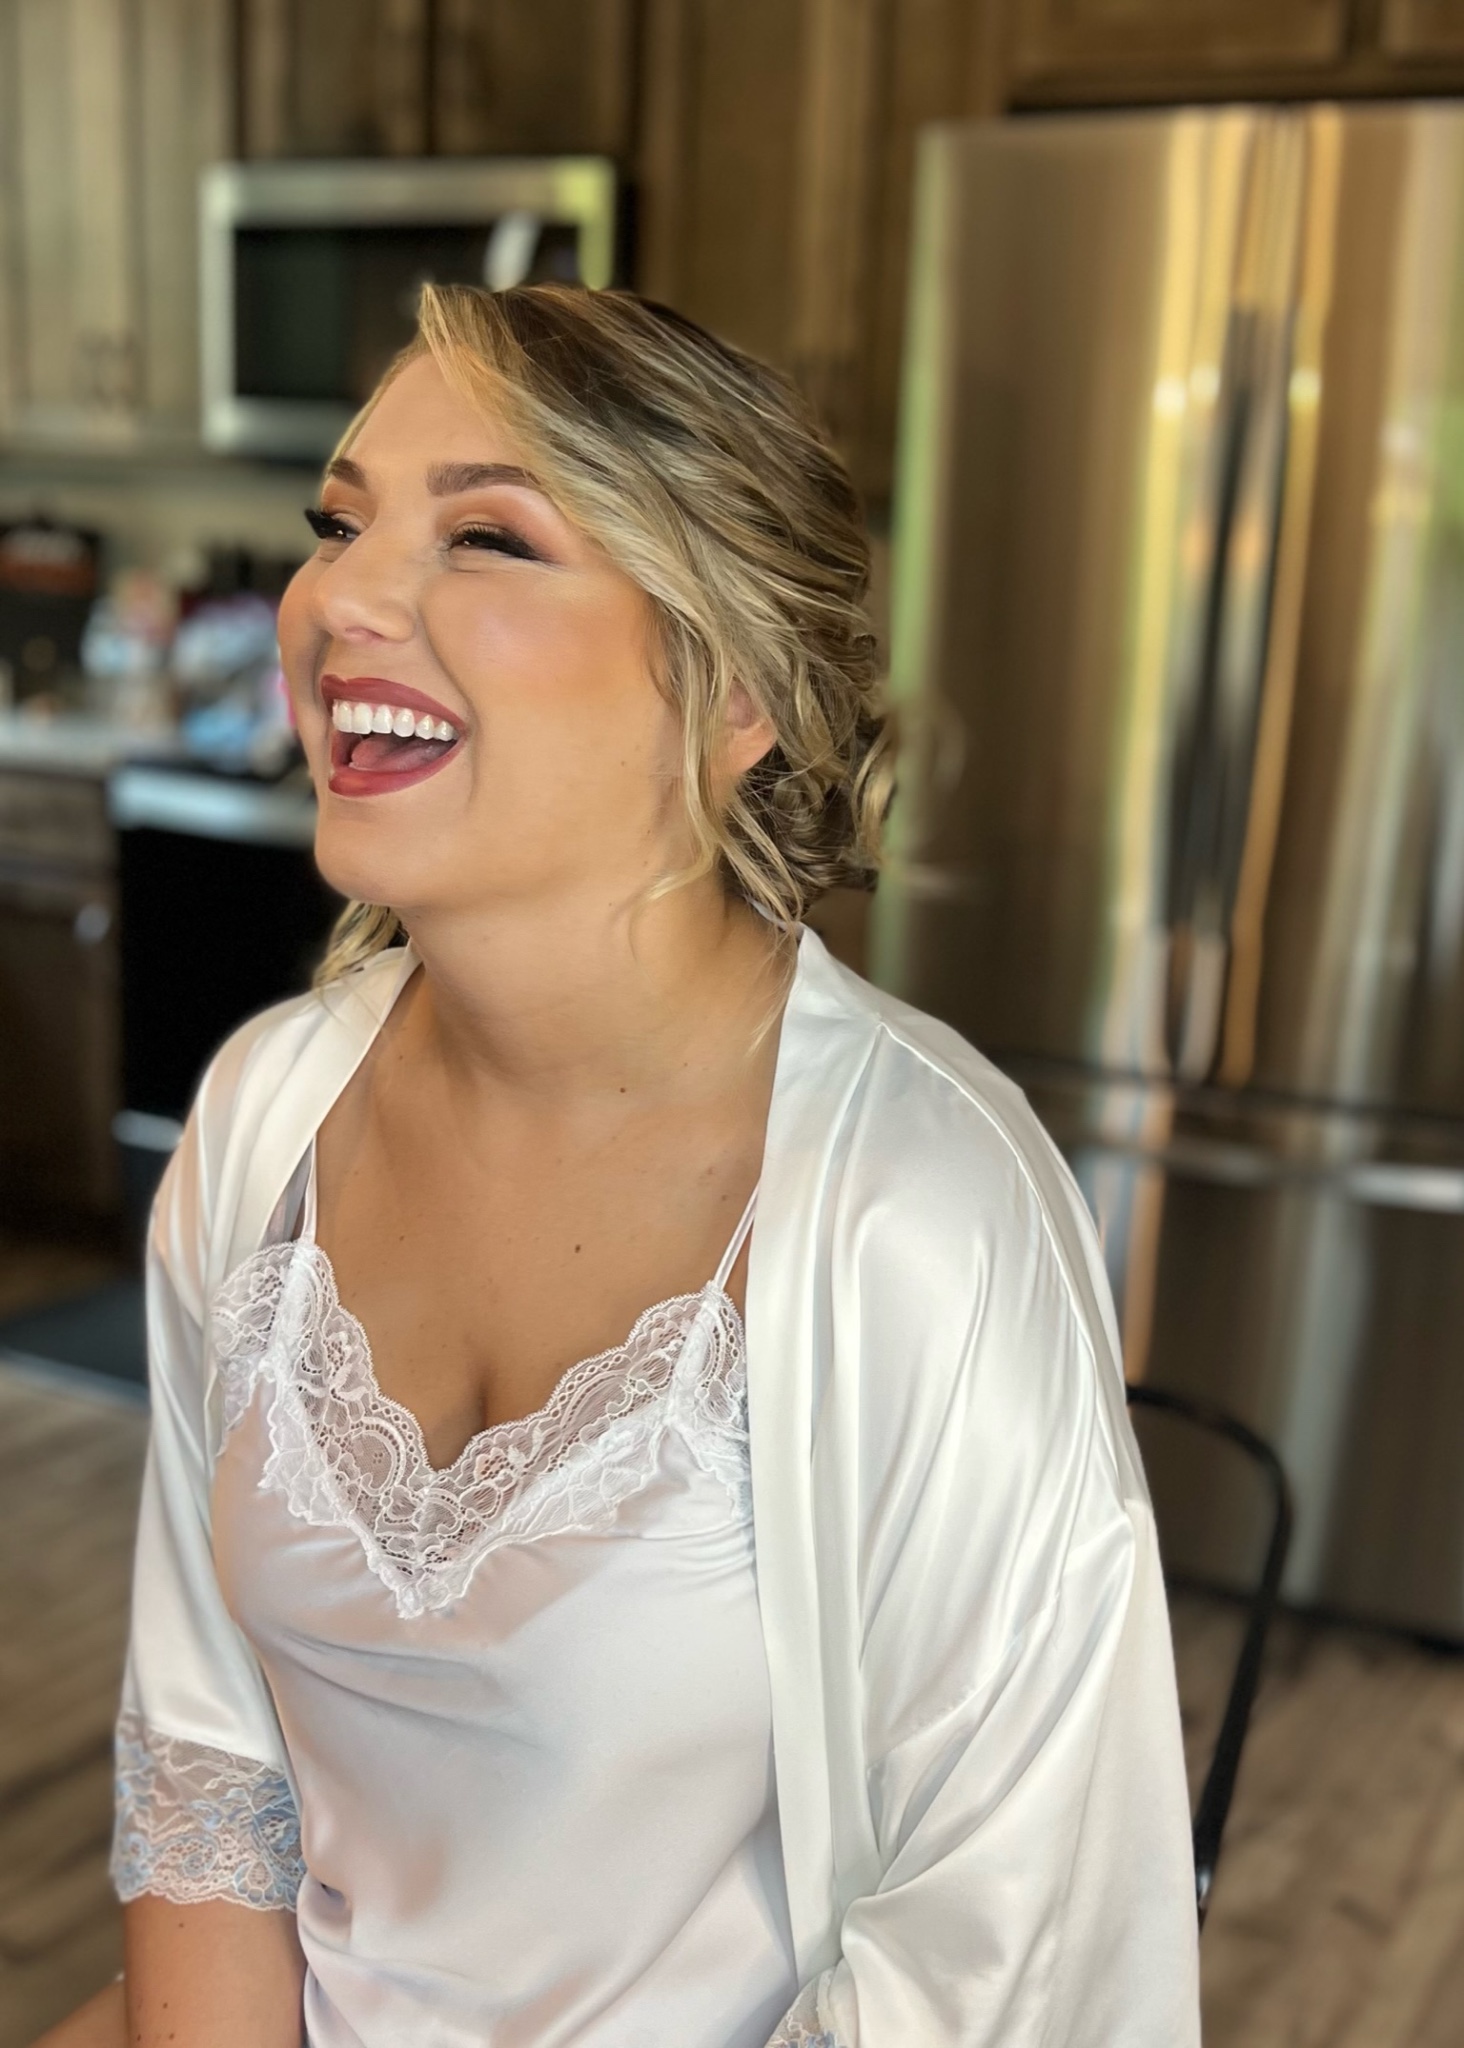 HR Business Partner Ashley Wilson on her wedding day after having her makeup done by Val Gonzalez.